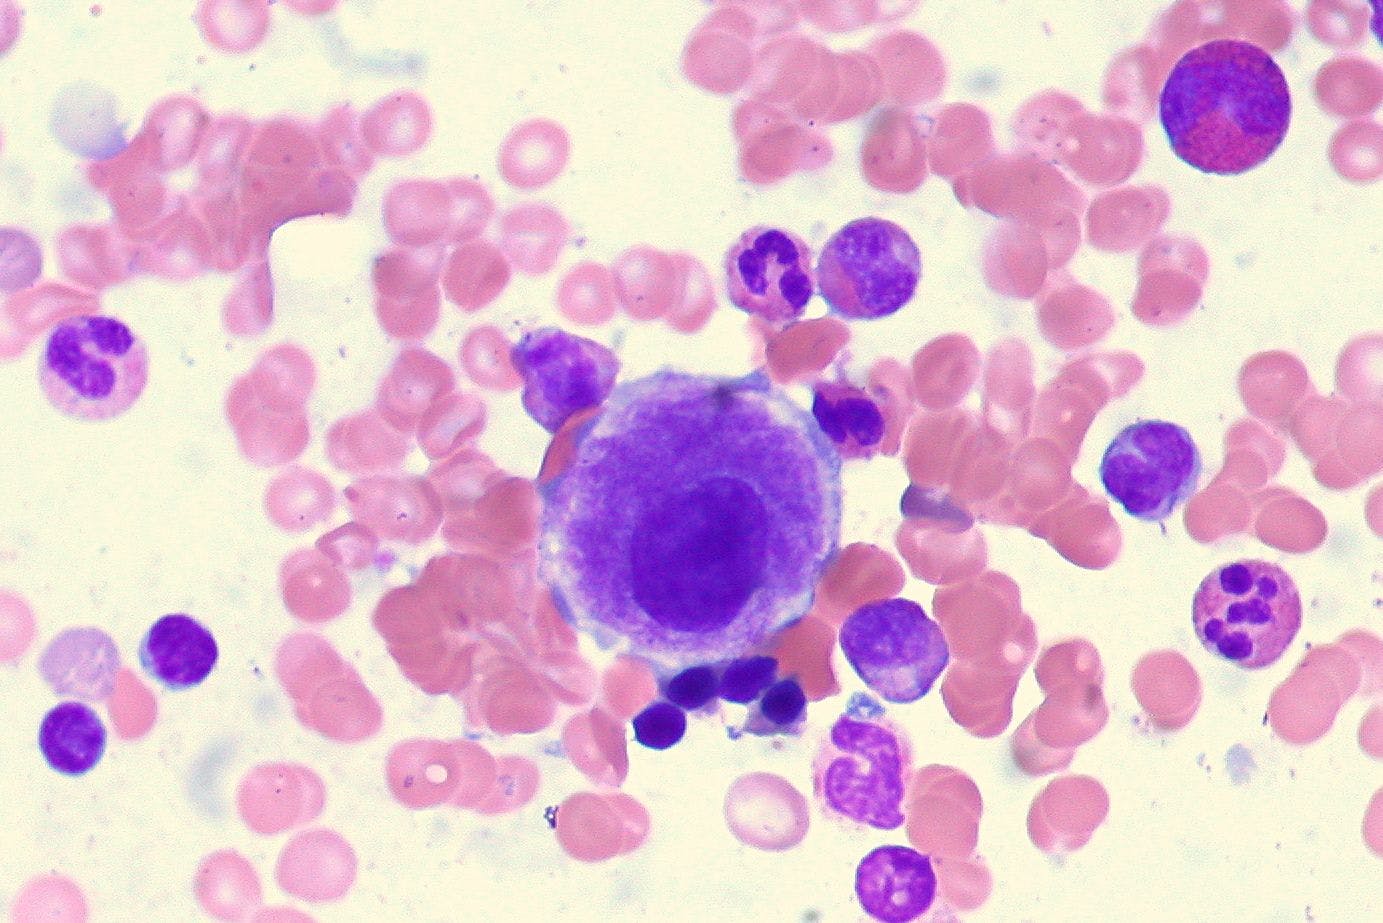 "Luspatercept is the first and only therapy to demonstrate superiority in a head-to-head study against ESAs in transfusion-dependent lower-risk MDS, [and this should be] considered a paradigm shift in the treatment of lower-risk MDS–associated anemia," according to an expert from The University of Texas MD Anderson Cancer Center.